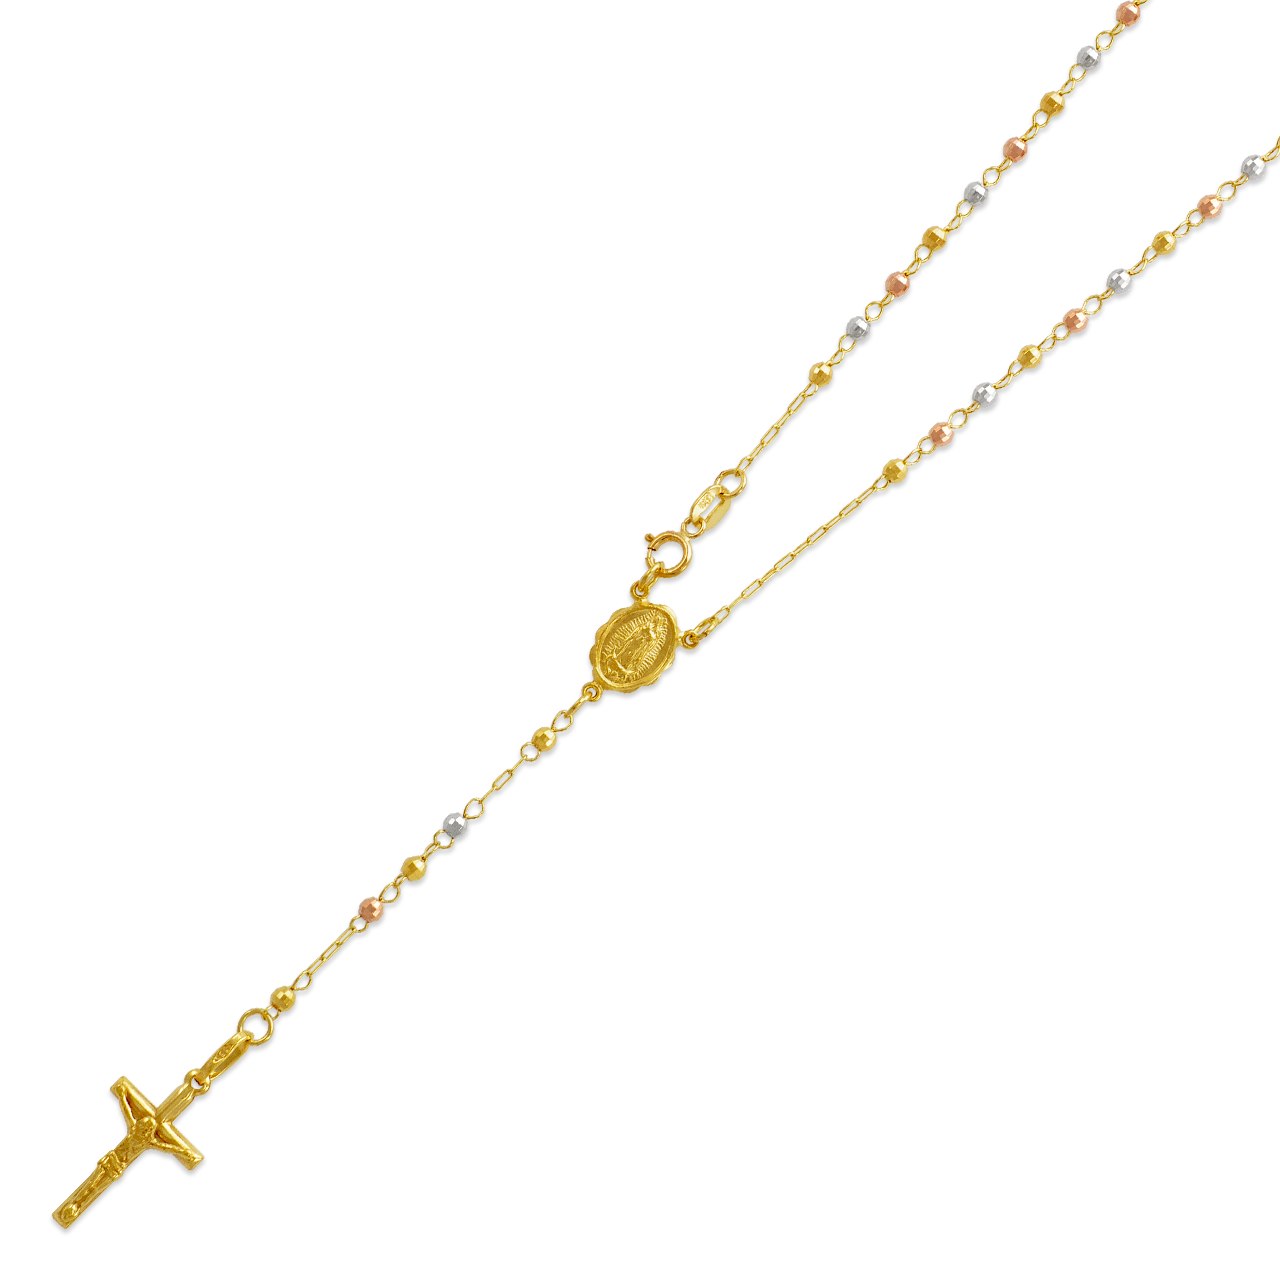 DoubleAccent 14K Tri-color Gold Chain Cross Necklace DC Bead Rosary Necklace (16, 18, 20, 24, 26")